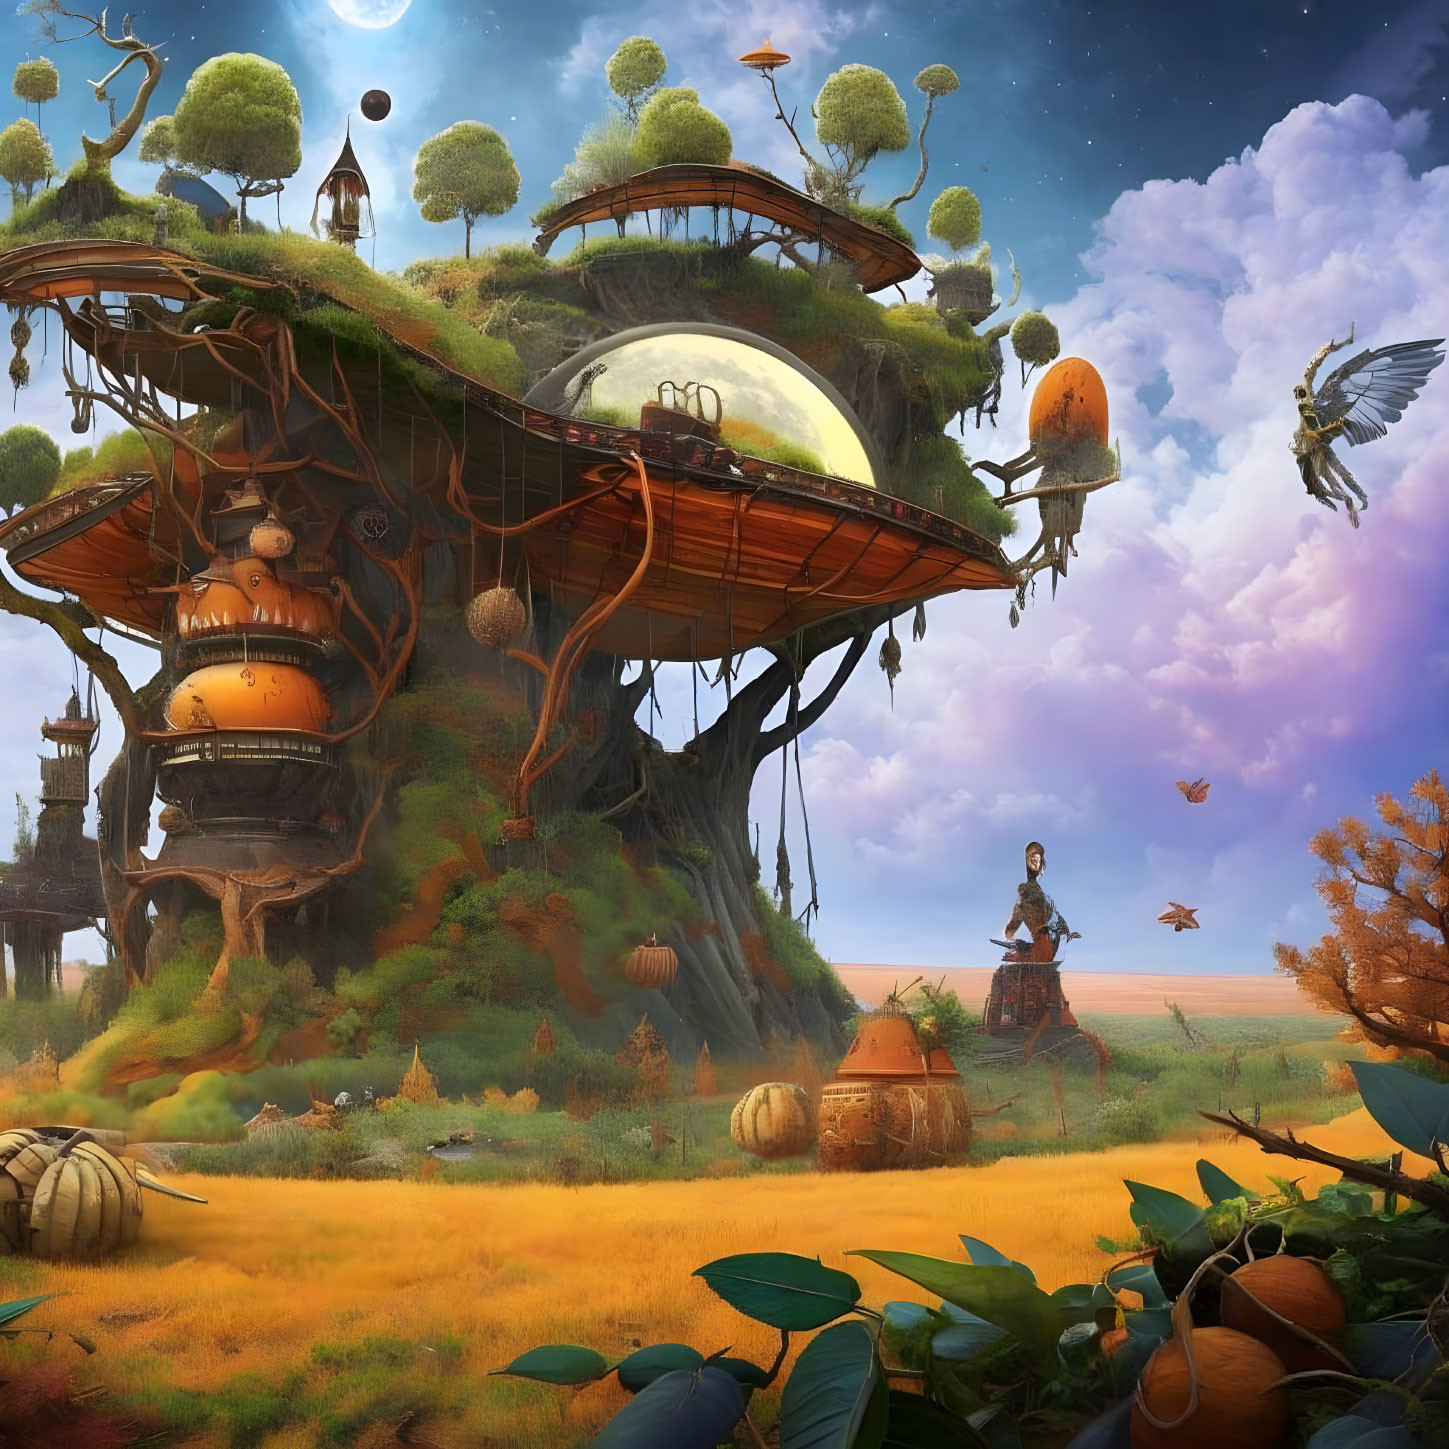 Fantasy landscape with treehouses, floating islands, pumpkins, giant moon, and mechanical bird creatures